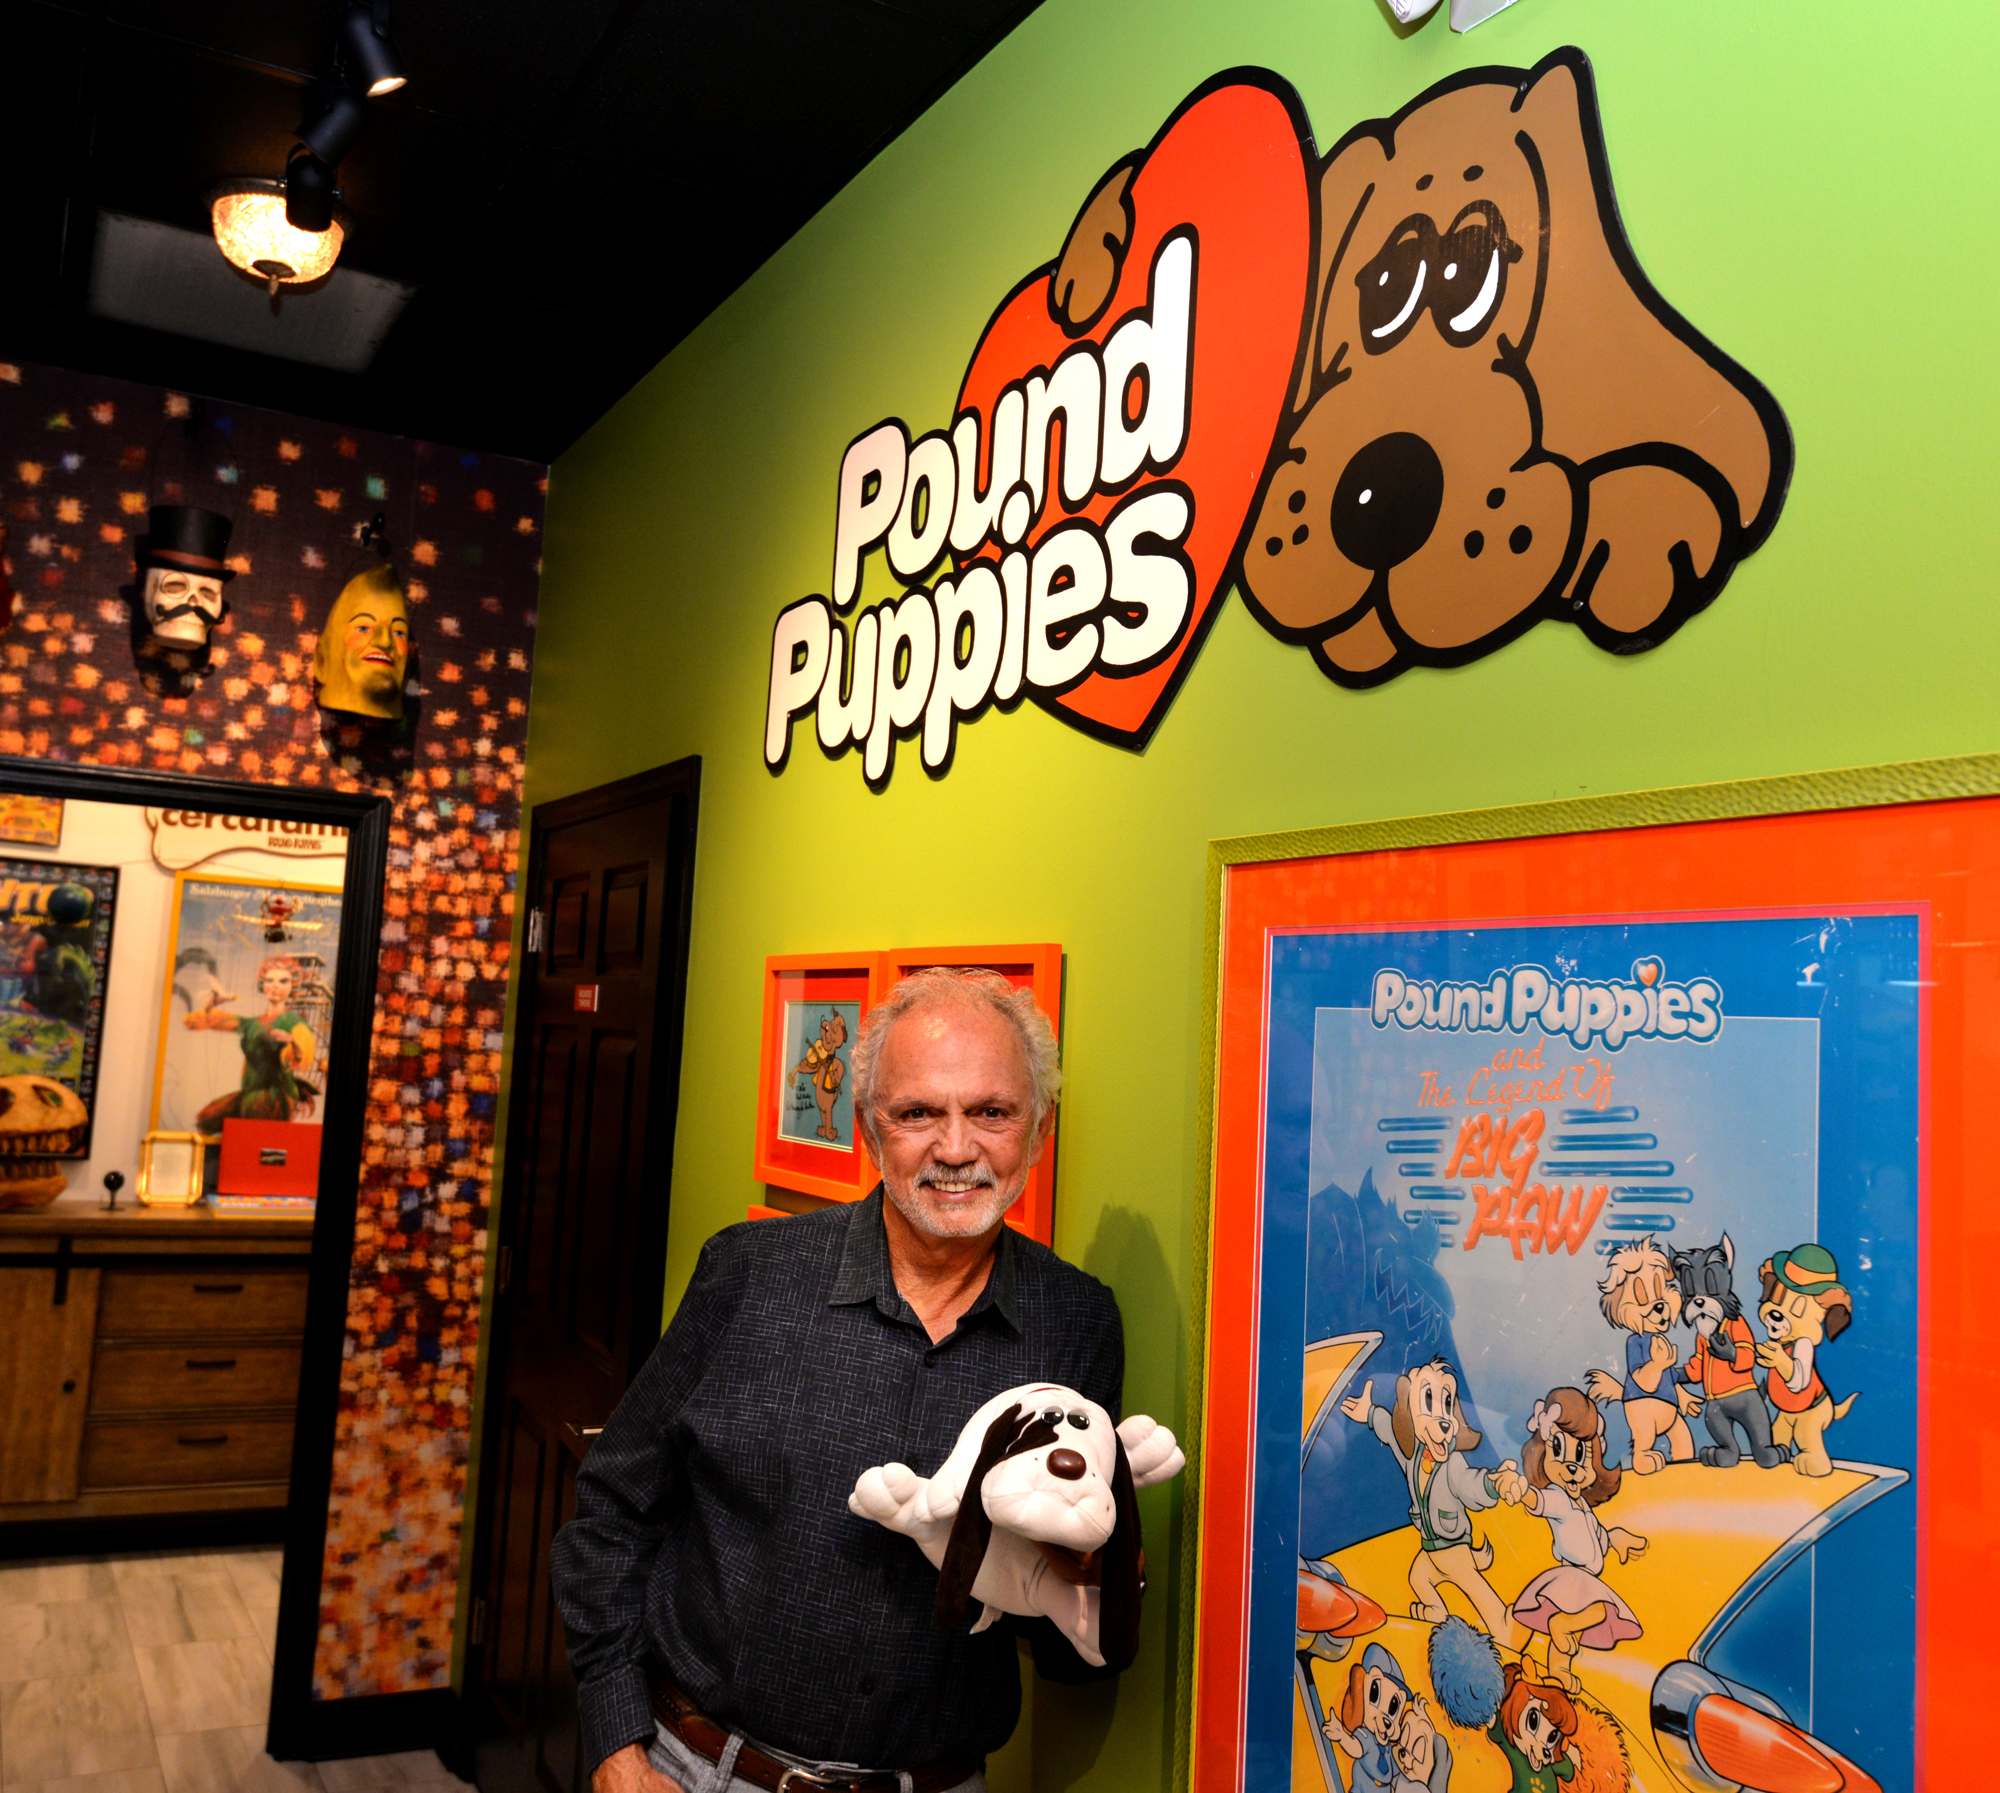 Mike Bowling, the creator of Pound Puppies, sold the brand to Hasbro in 2011, but he continues to oversee quality and work on new toy ideas at his office in Fernandina Beach.